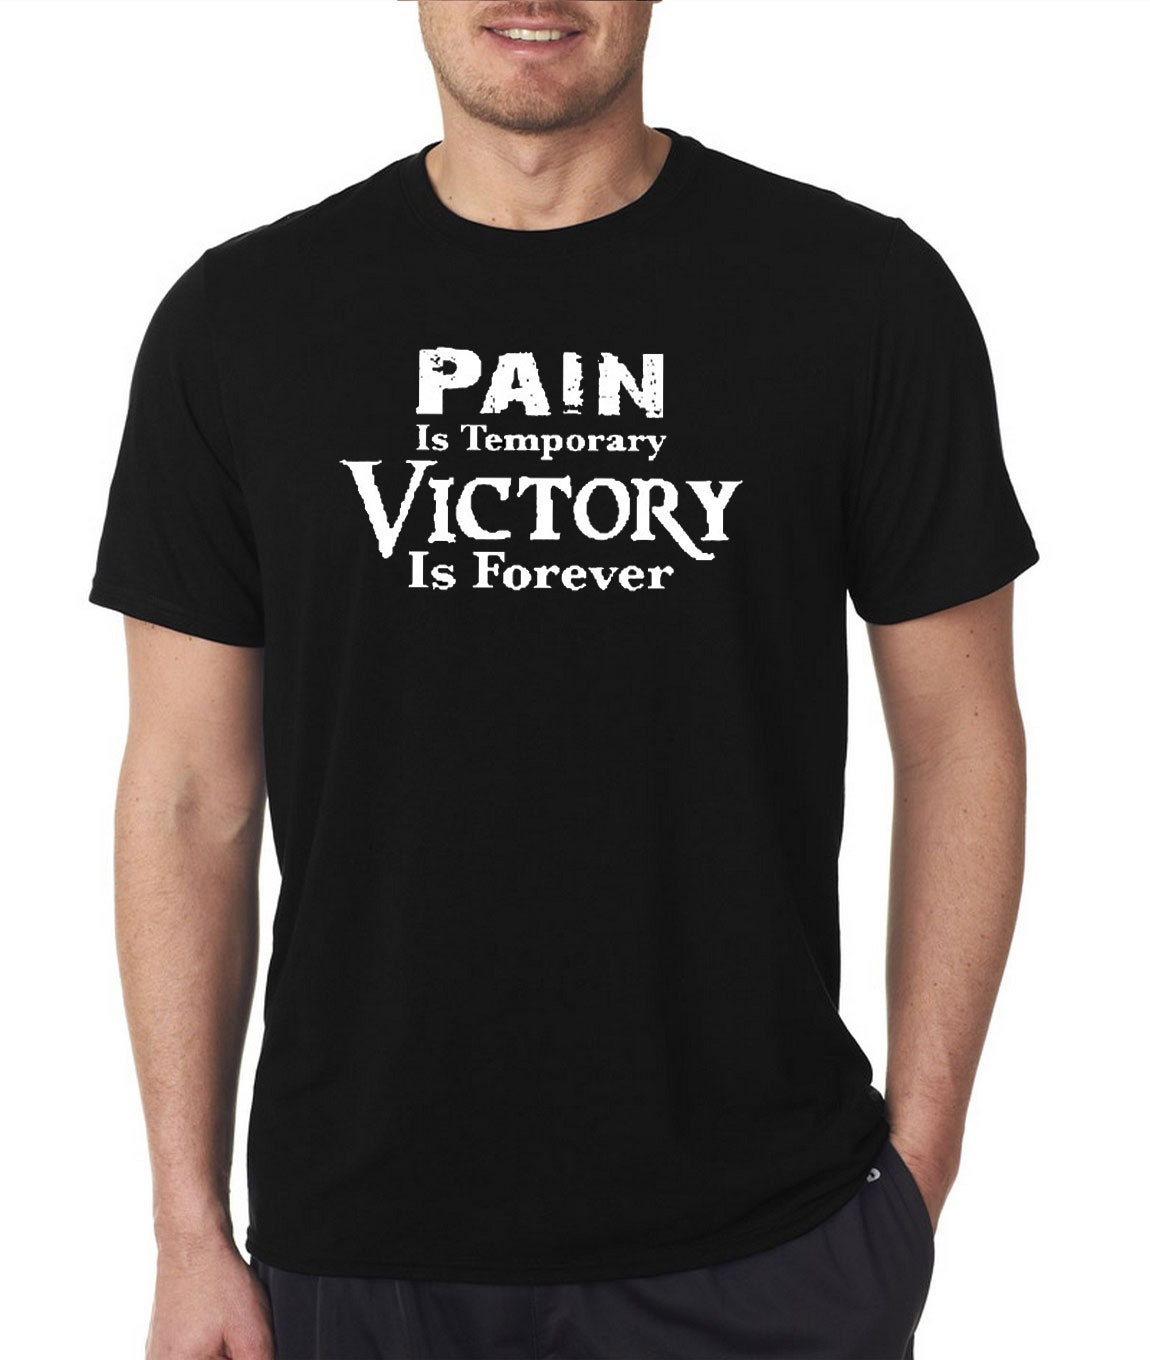 Pain Is Temporary Victory is forever T-shirt